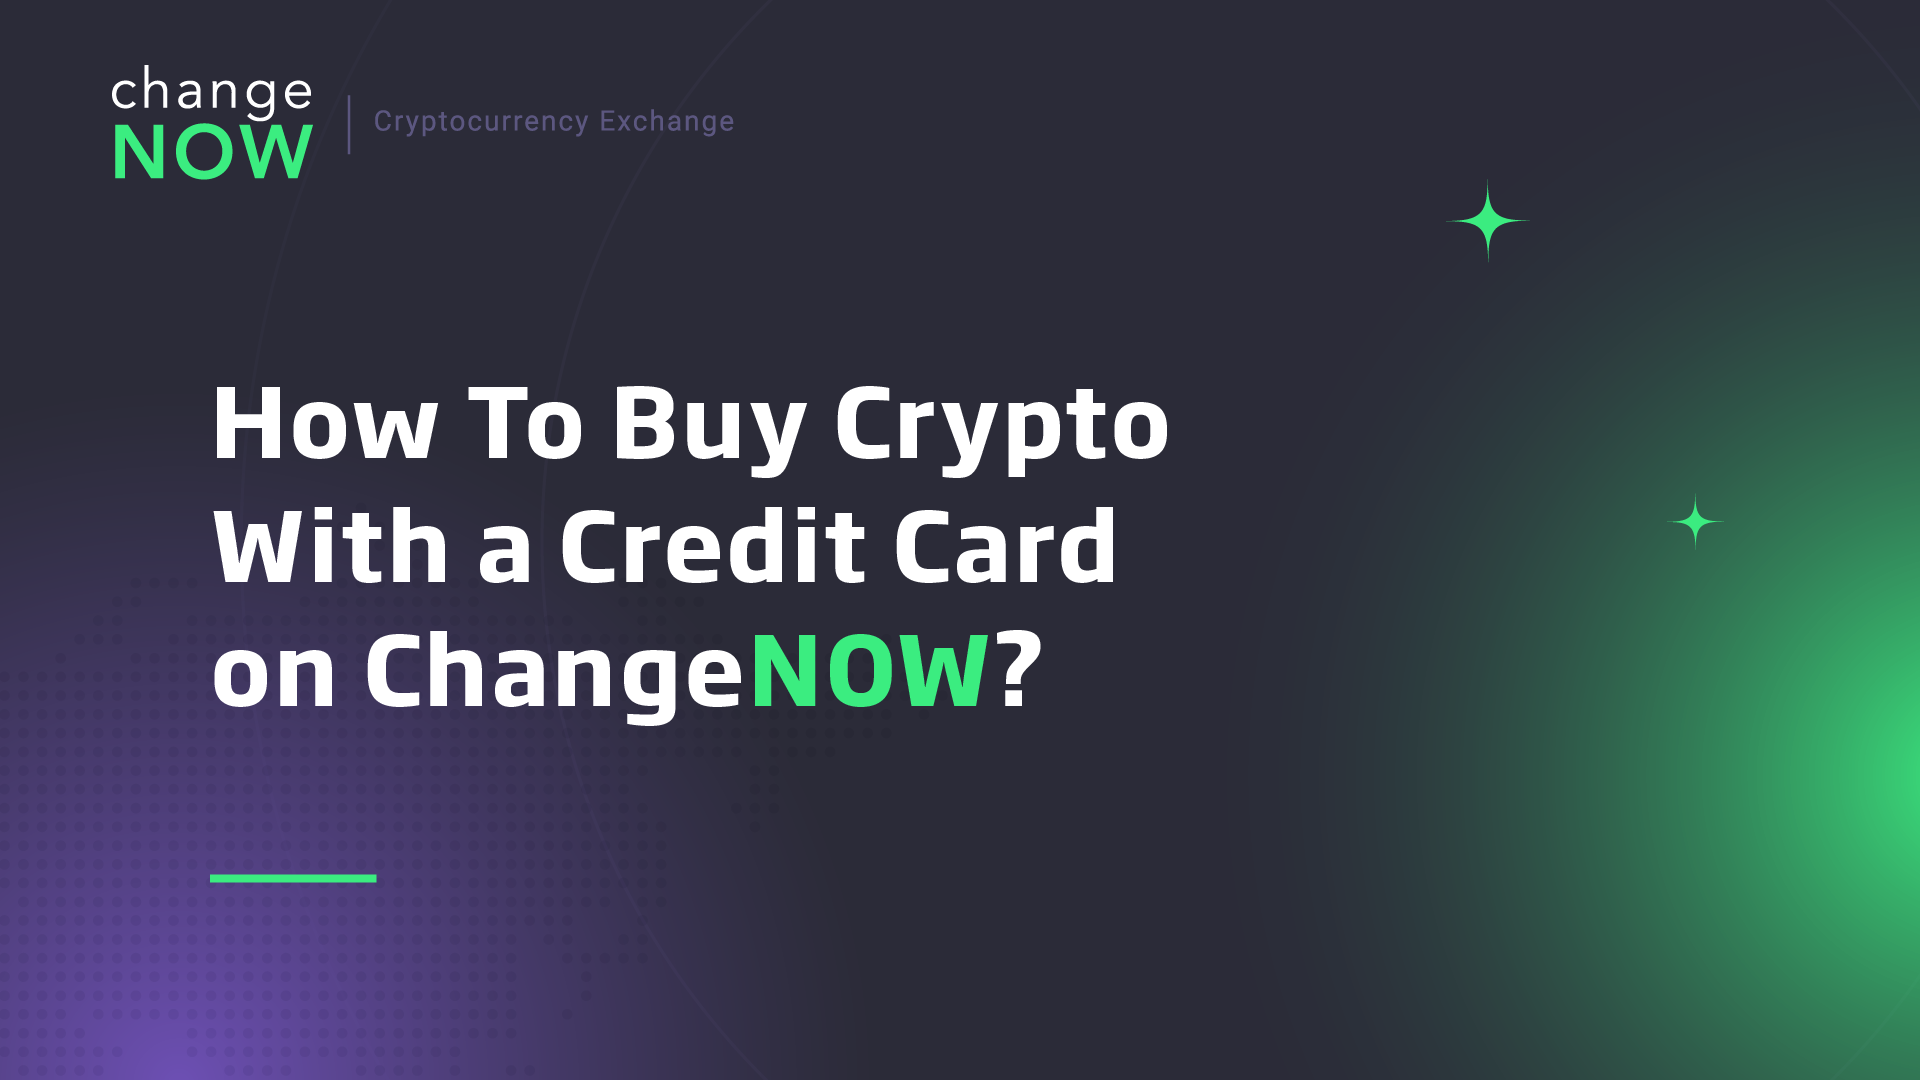 How To Buy Crypto With a Credit Card on ChangeNOW